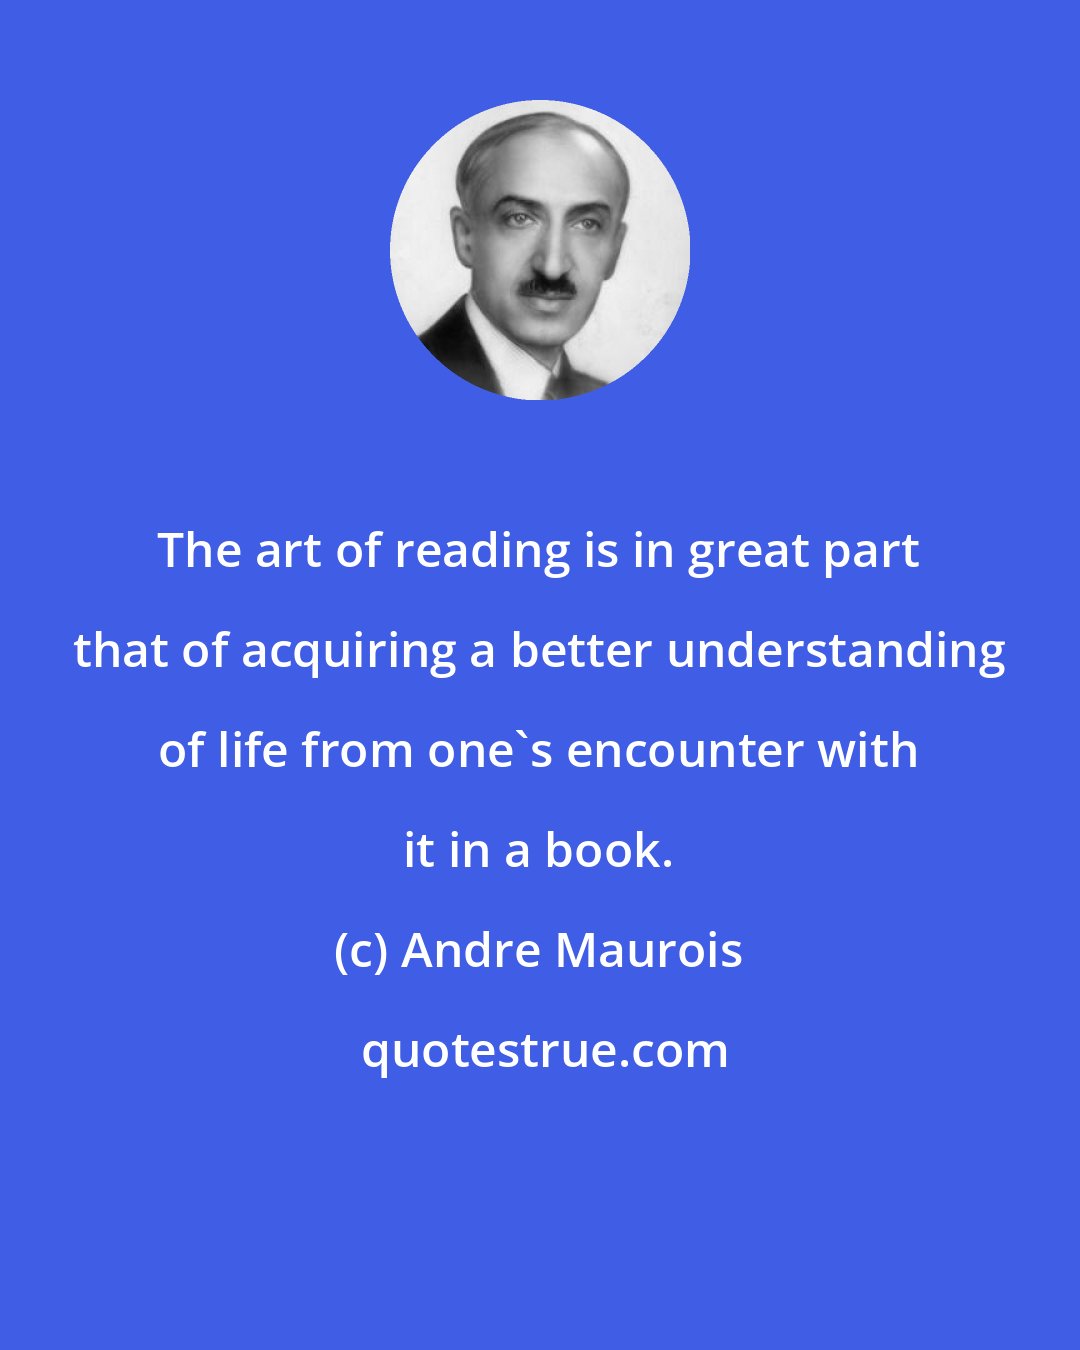 Andre Maurois: The art of reading is in great part that of acquiring a better understanding of life from one's encounter with it in a book.